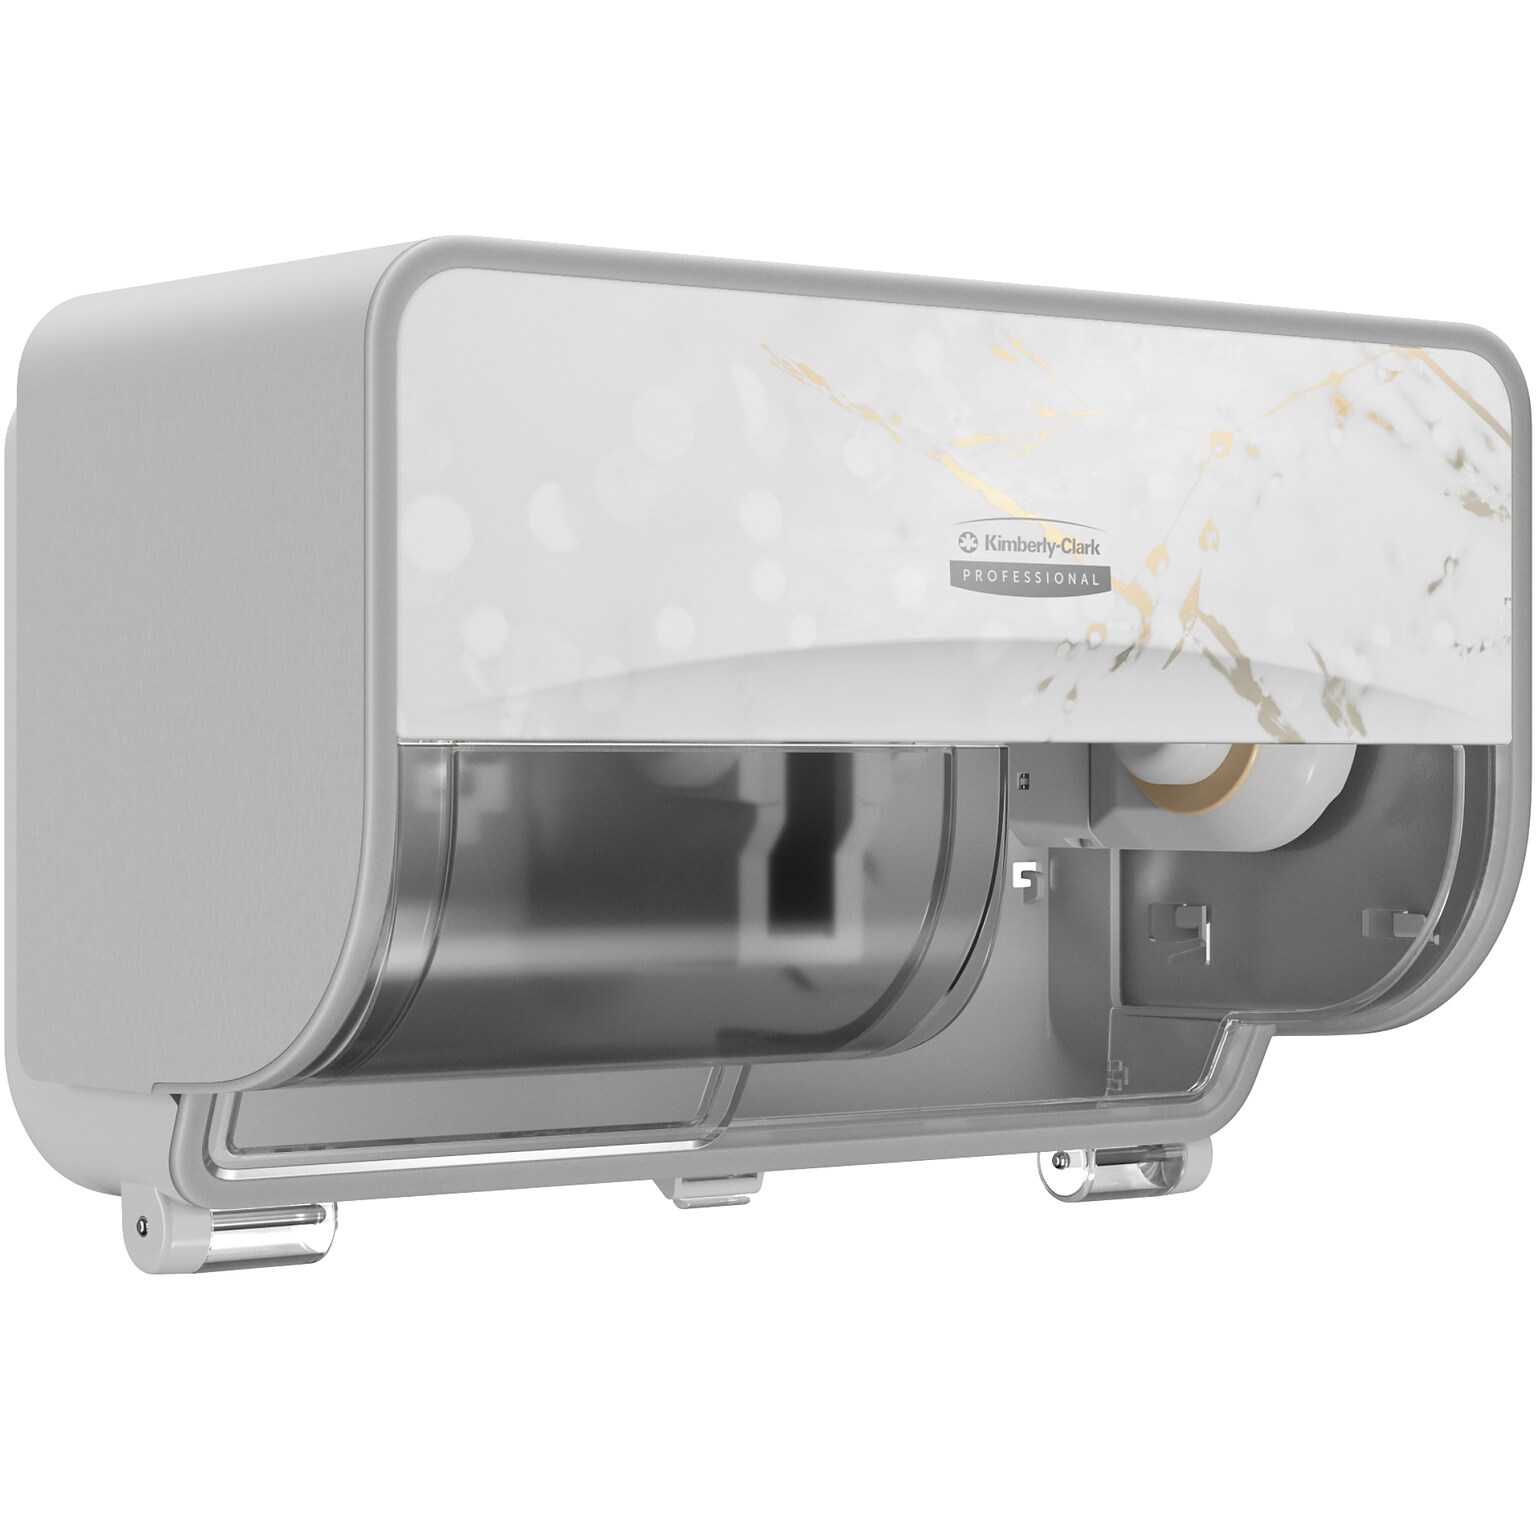 Kimberly-Clark Professional ICON Coreless 2-Roll Horizontal Toilet Paper Dispenser with Faceplate, Cherry Blossom (58732)